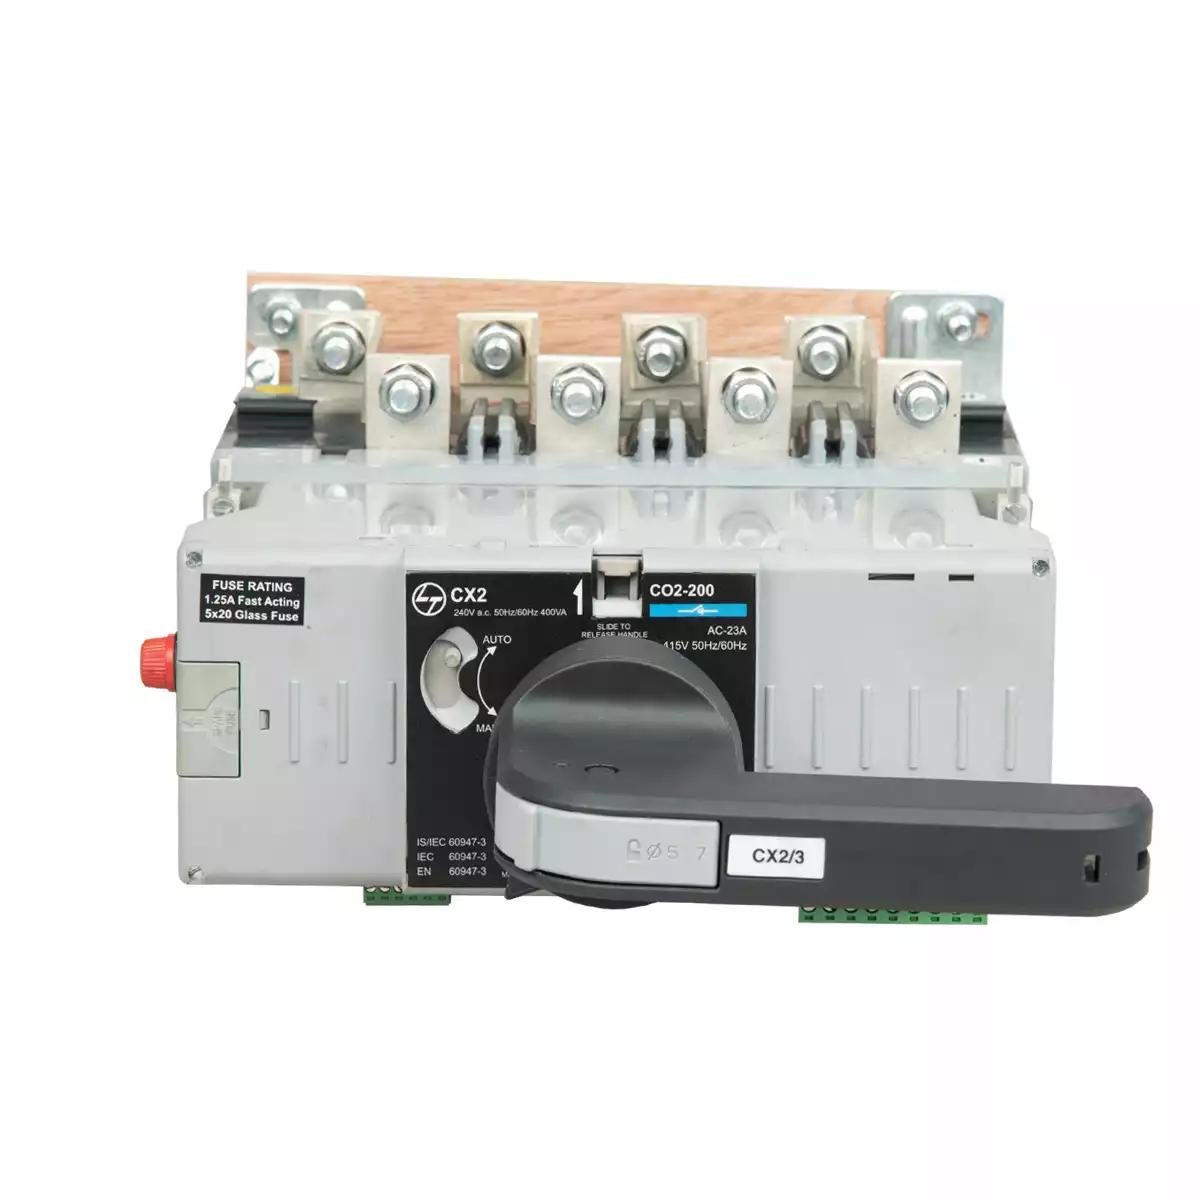 C-Line Motorised Changeover Switch FR2 160A 4P 415V AC Open Execution